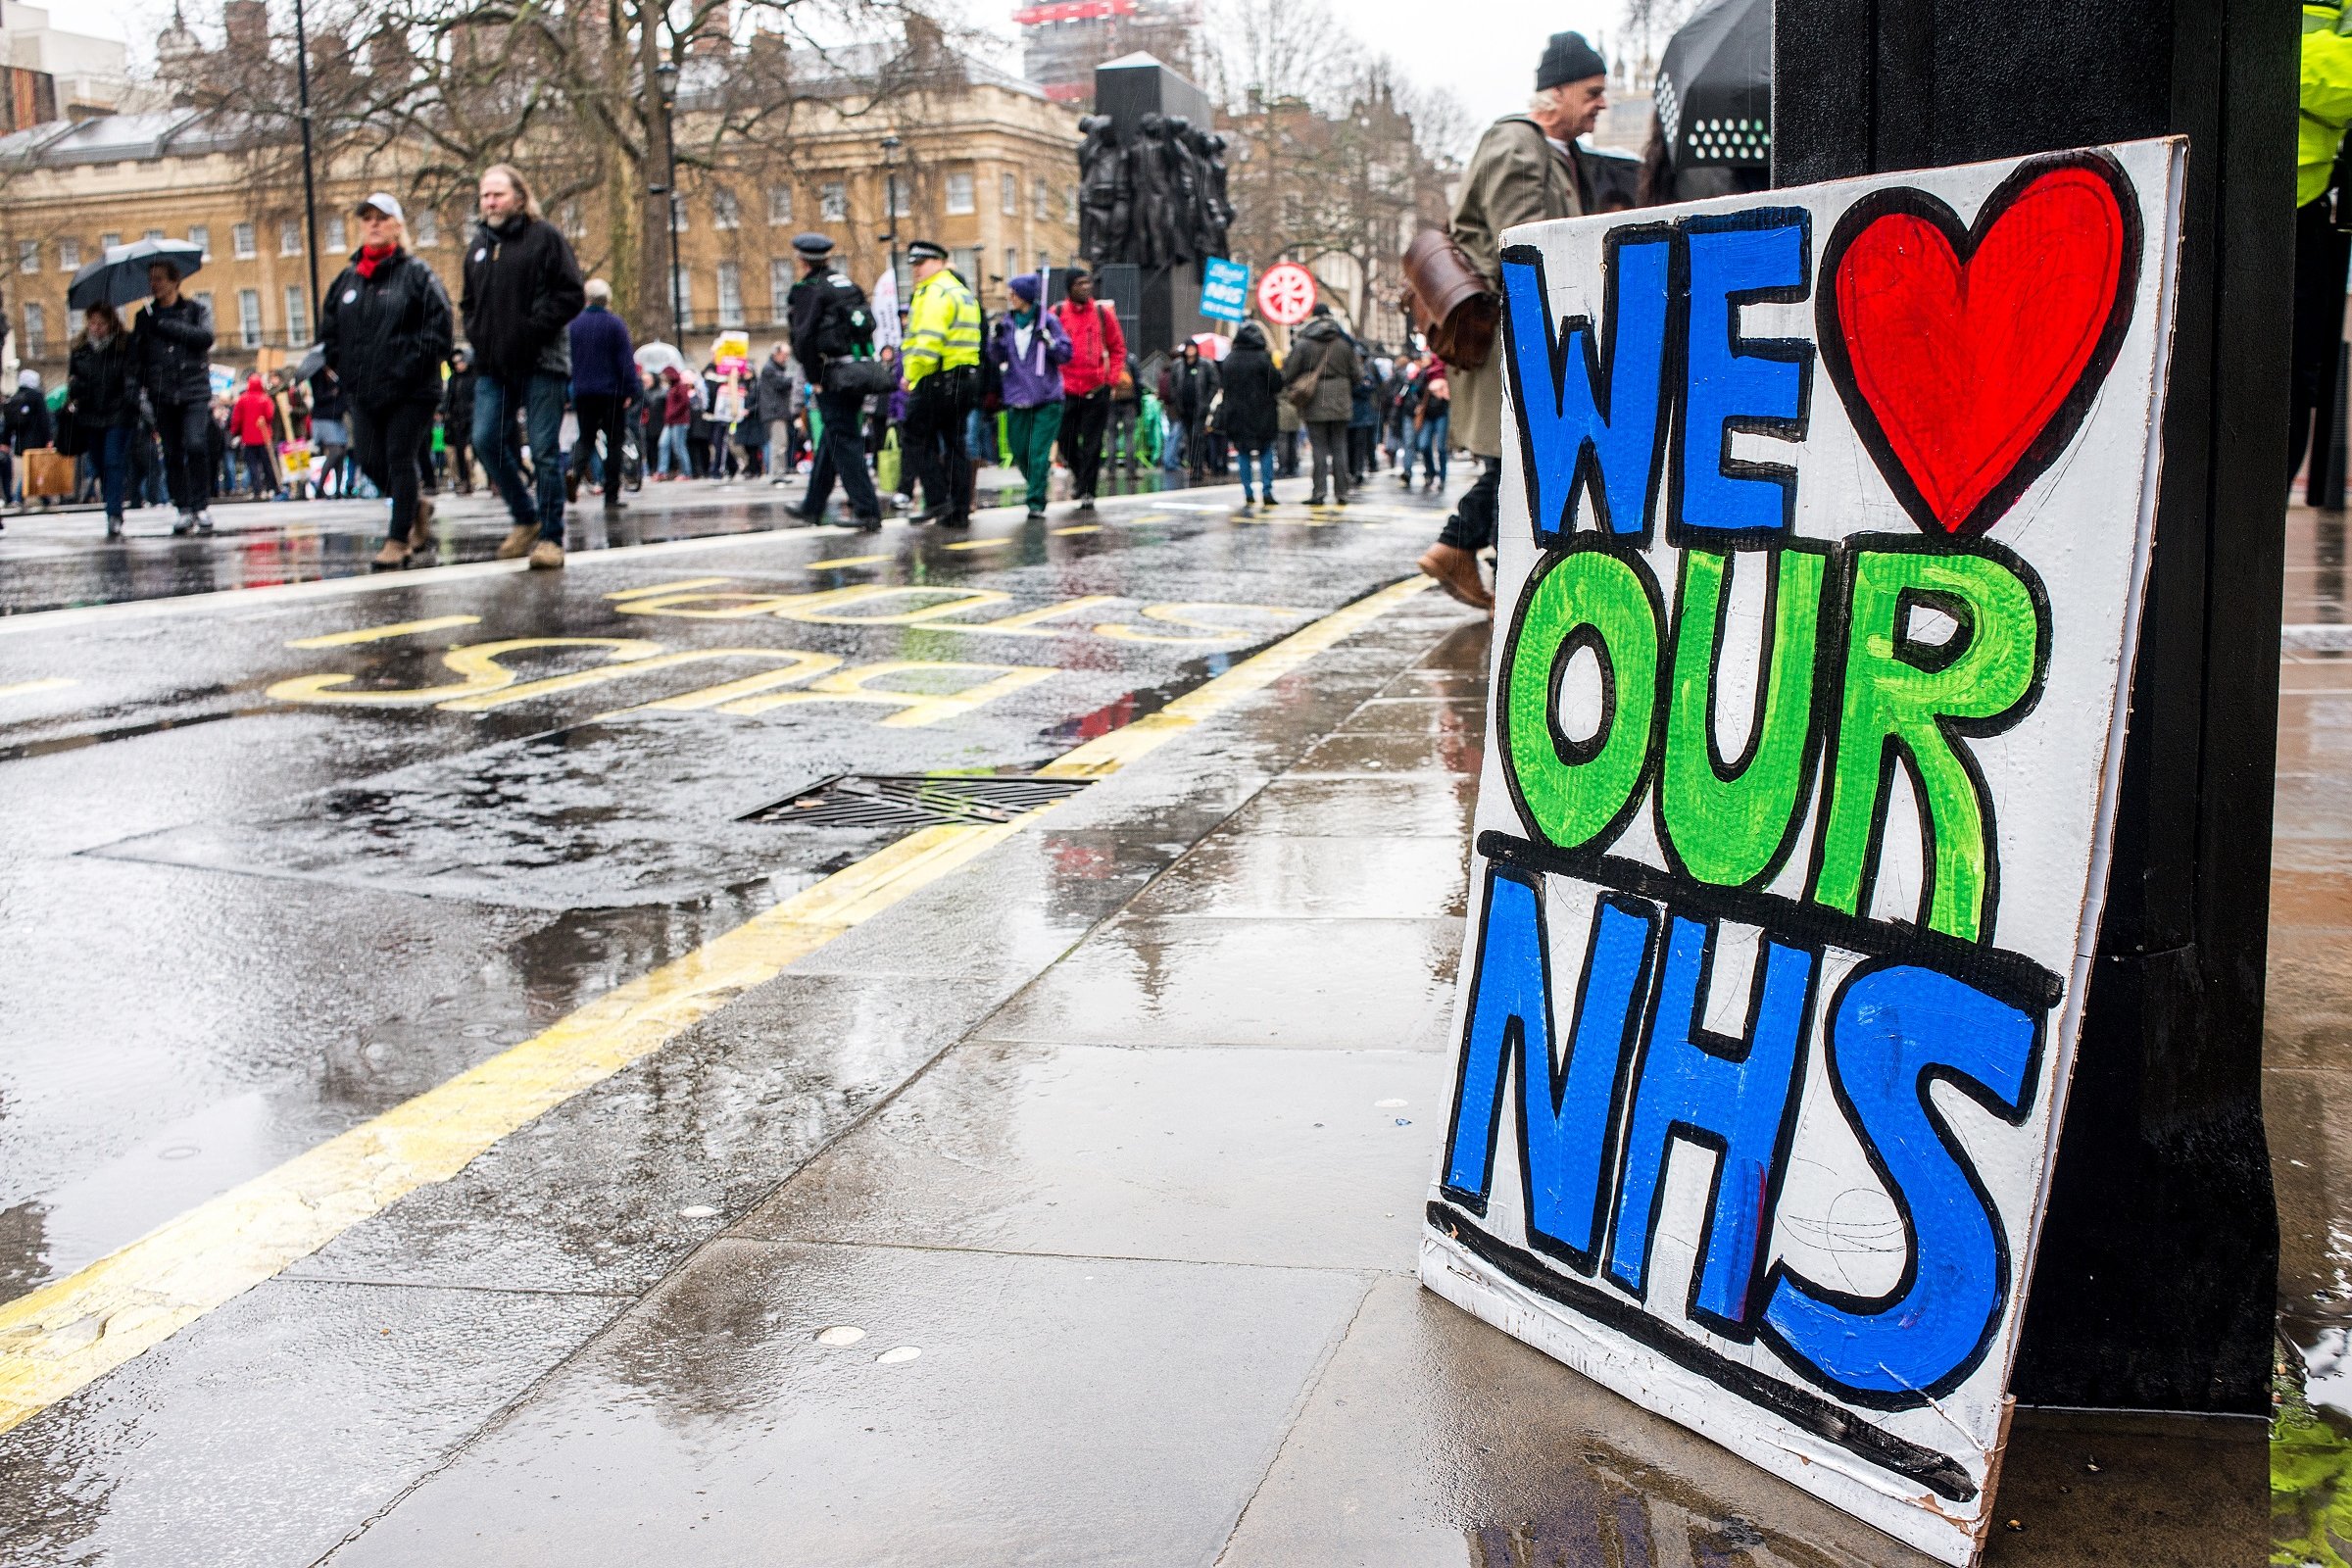 Clapping for the NHS, our new religion